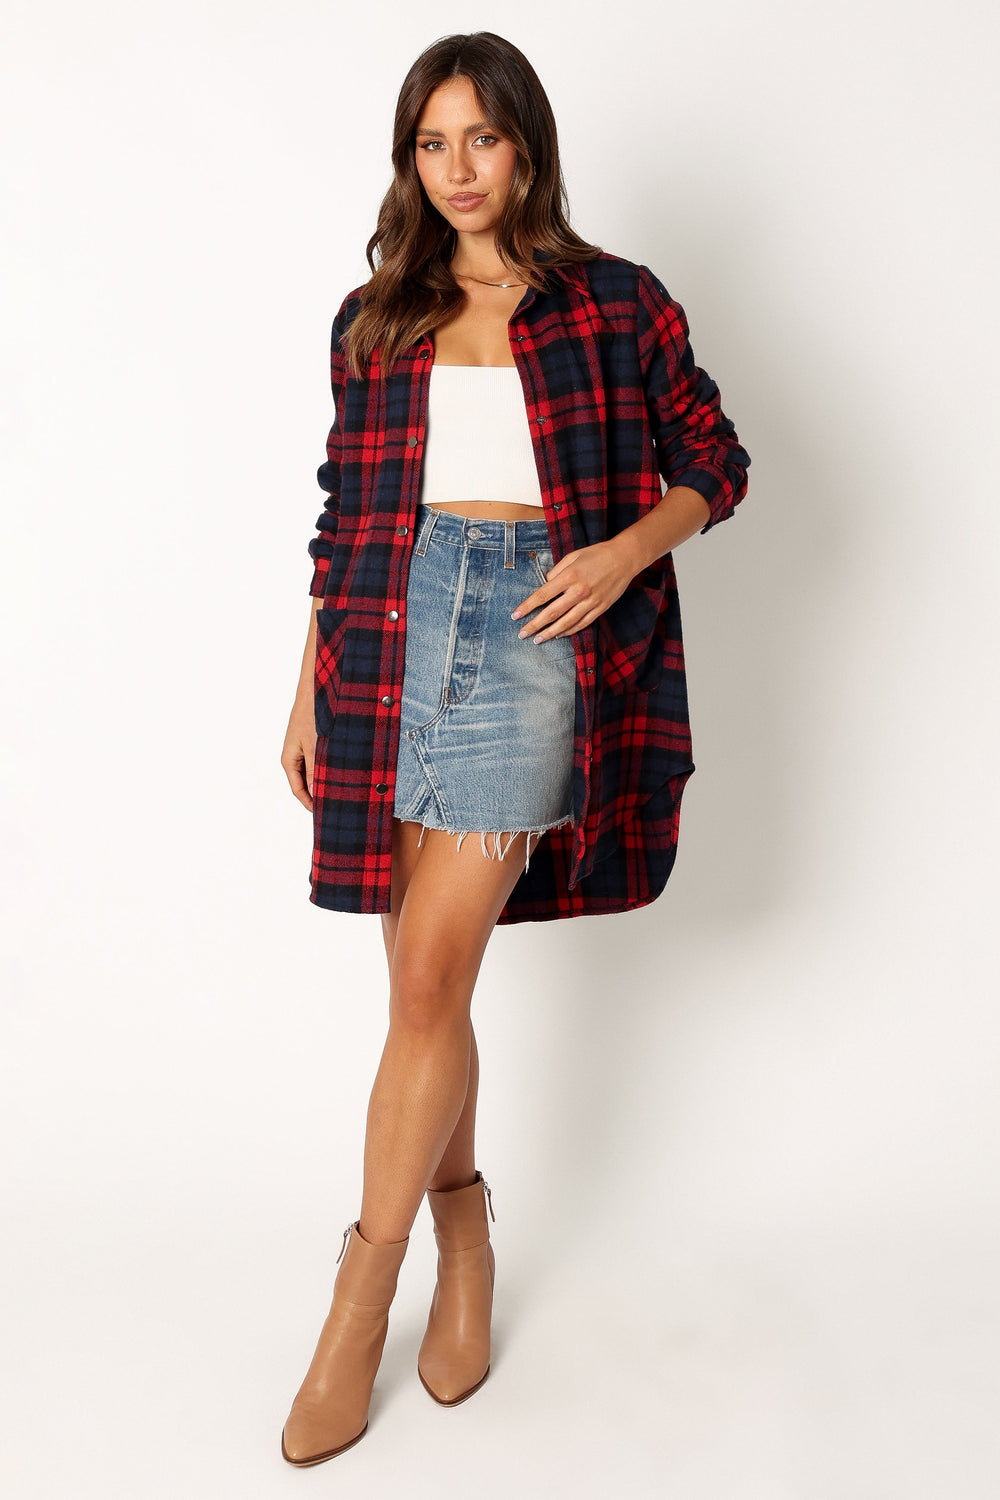 Petal and Pup USA OUTERWEAR Lilith Plaid Shacket - Red